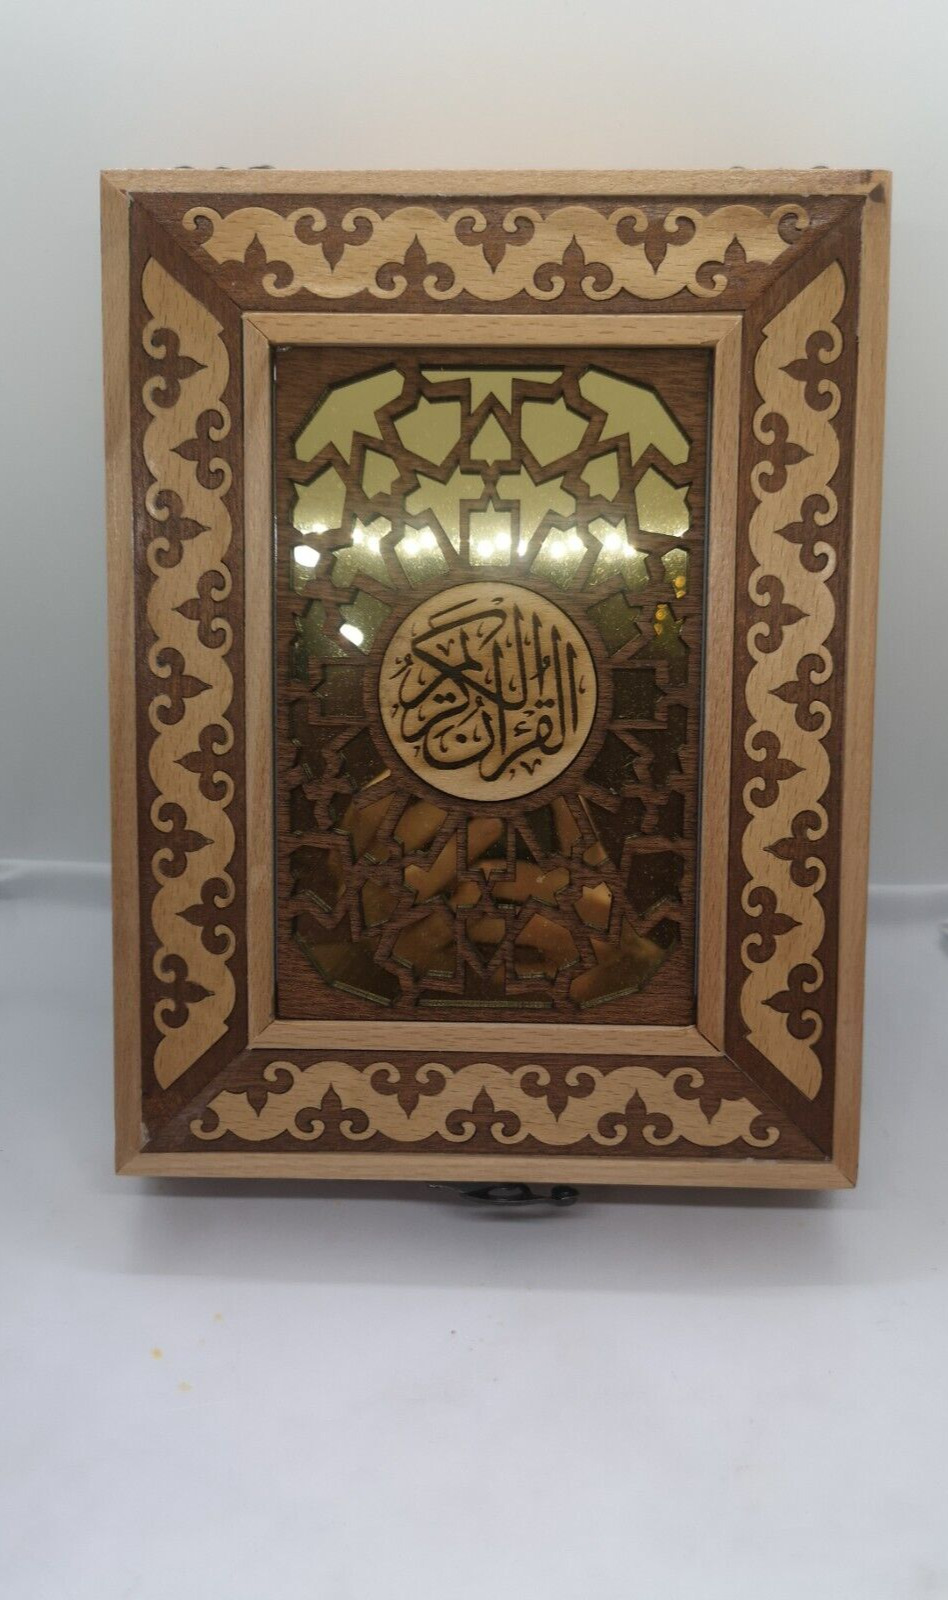 Wood Wooden Quran Islamic Religion Islam Etched Box Handmade Crafted Home Decor